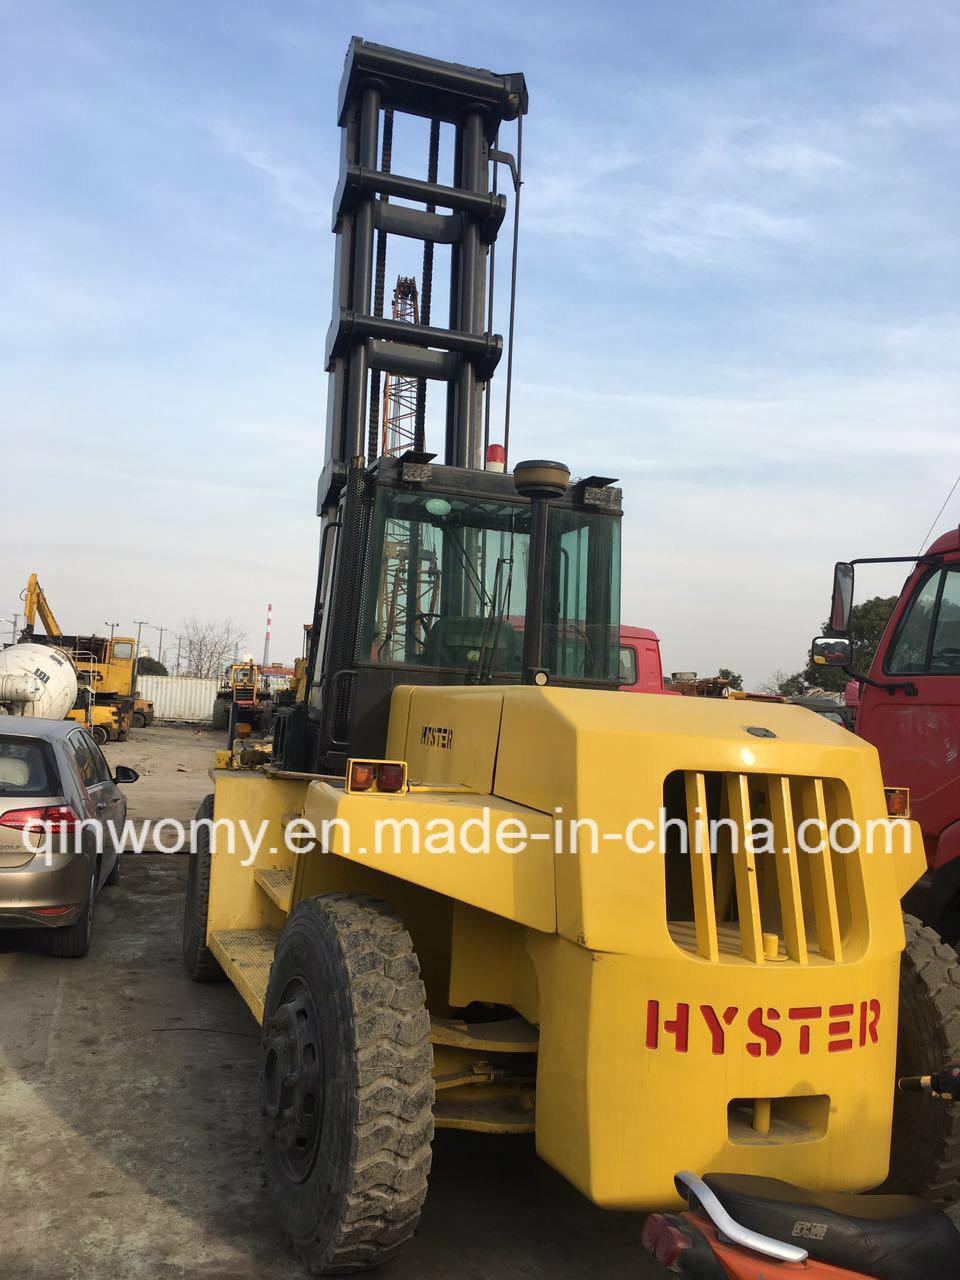 Second Hand Hyster Hydraulic Forklift for Sale